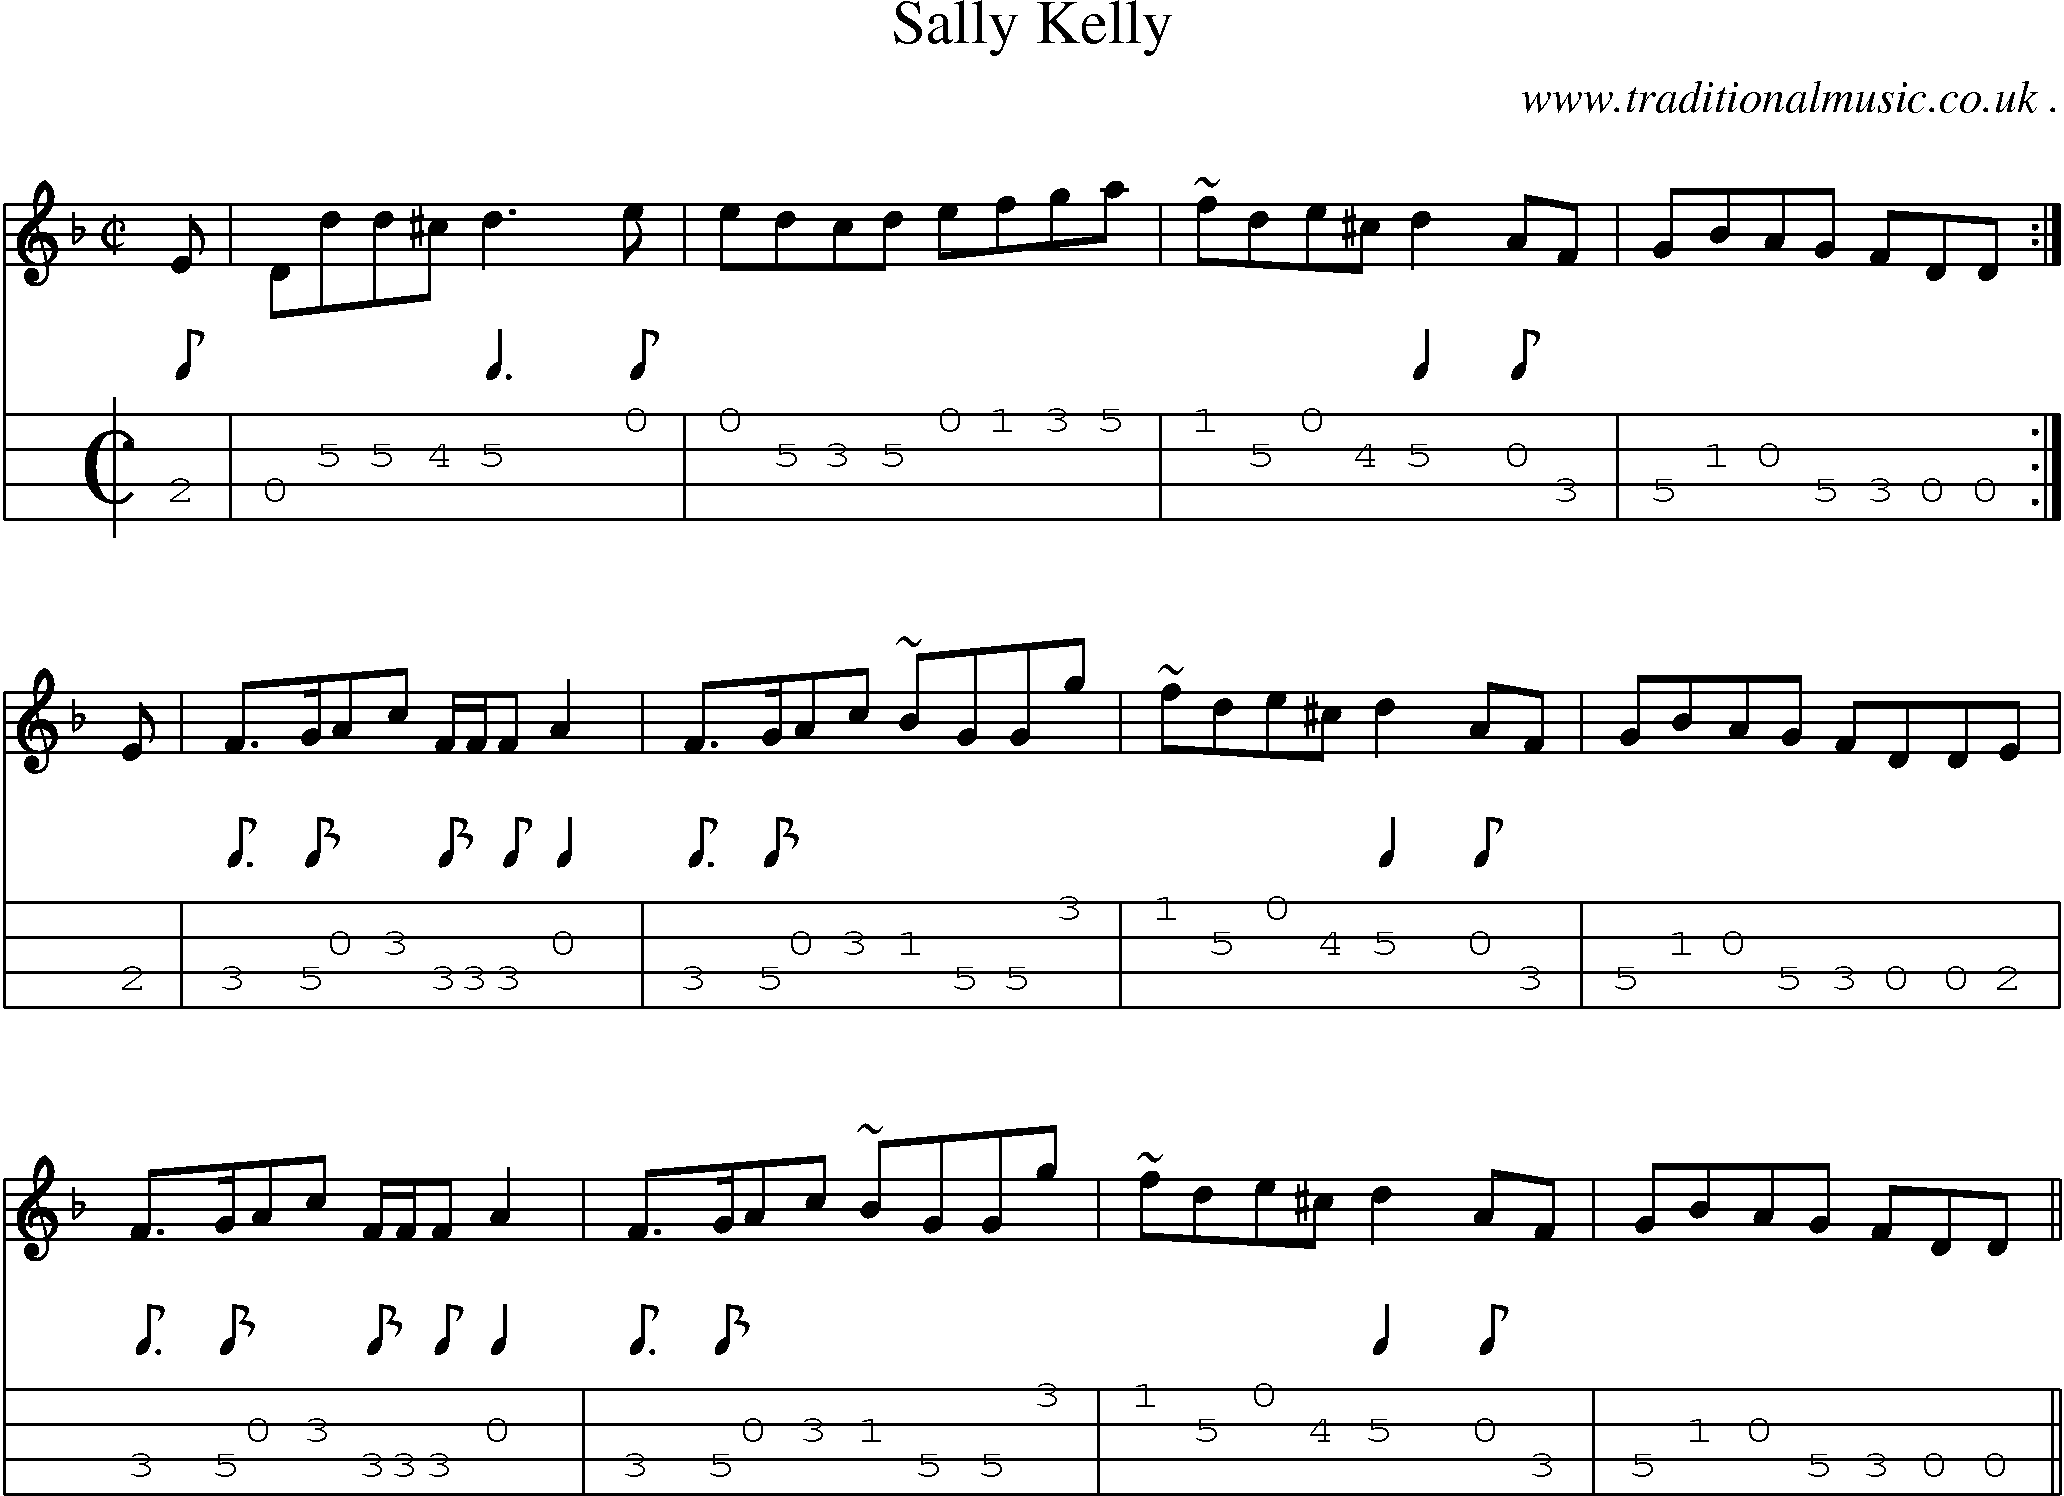 Sheet-music  score, Chords and Mandolin Tabs for Sally Kelly